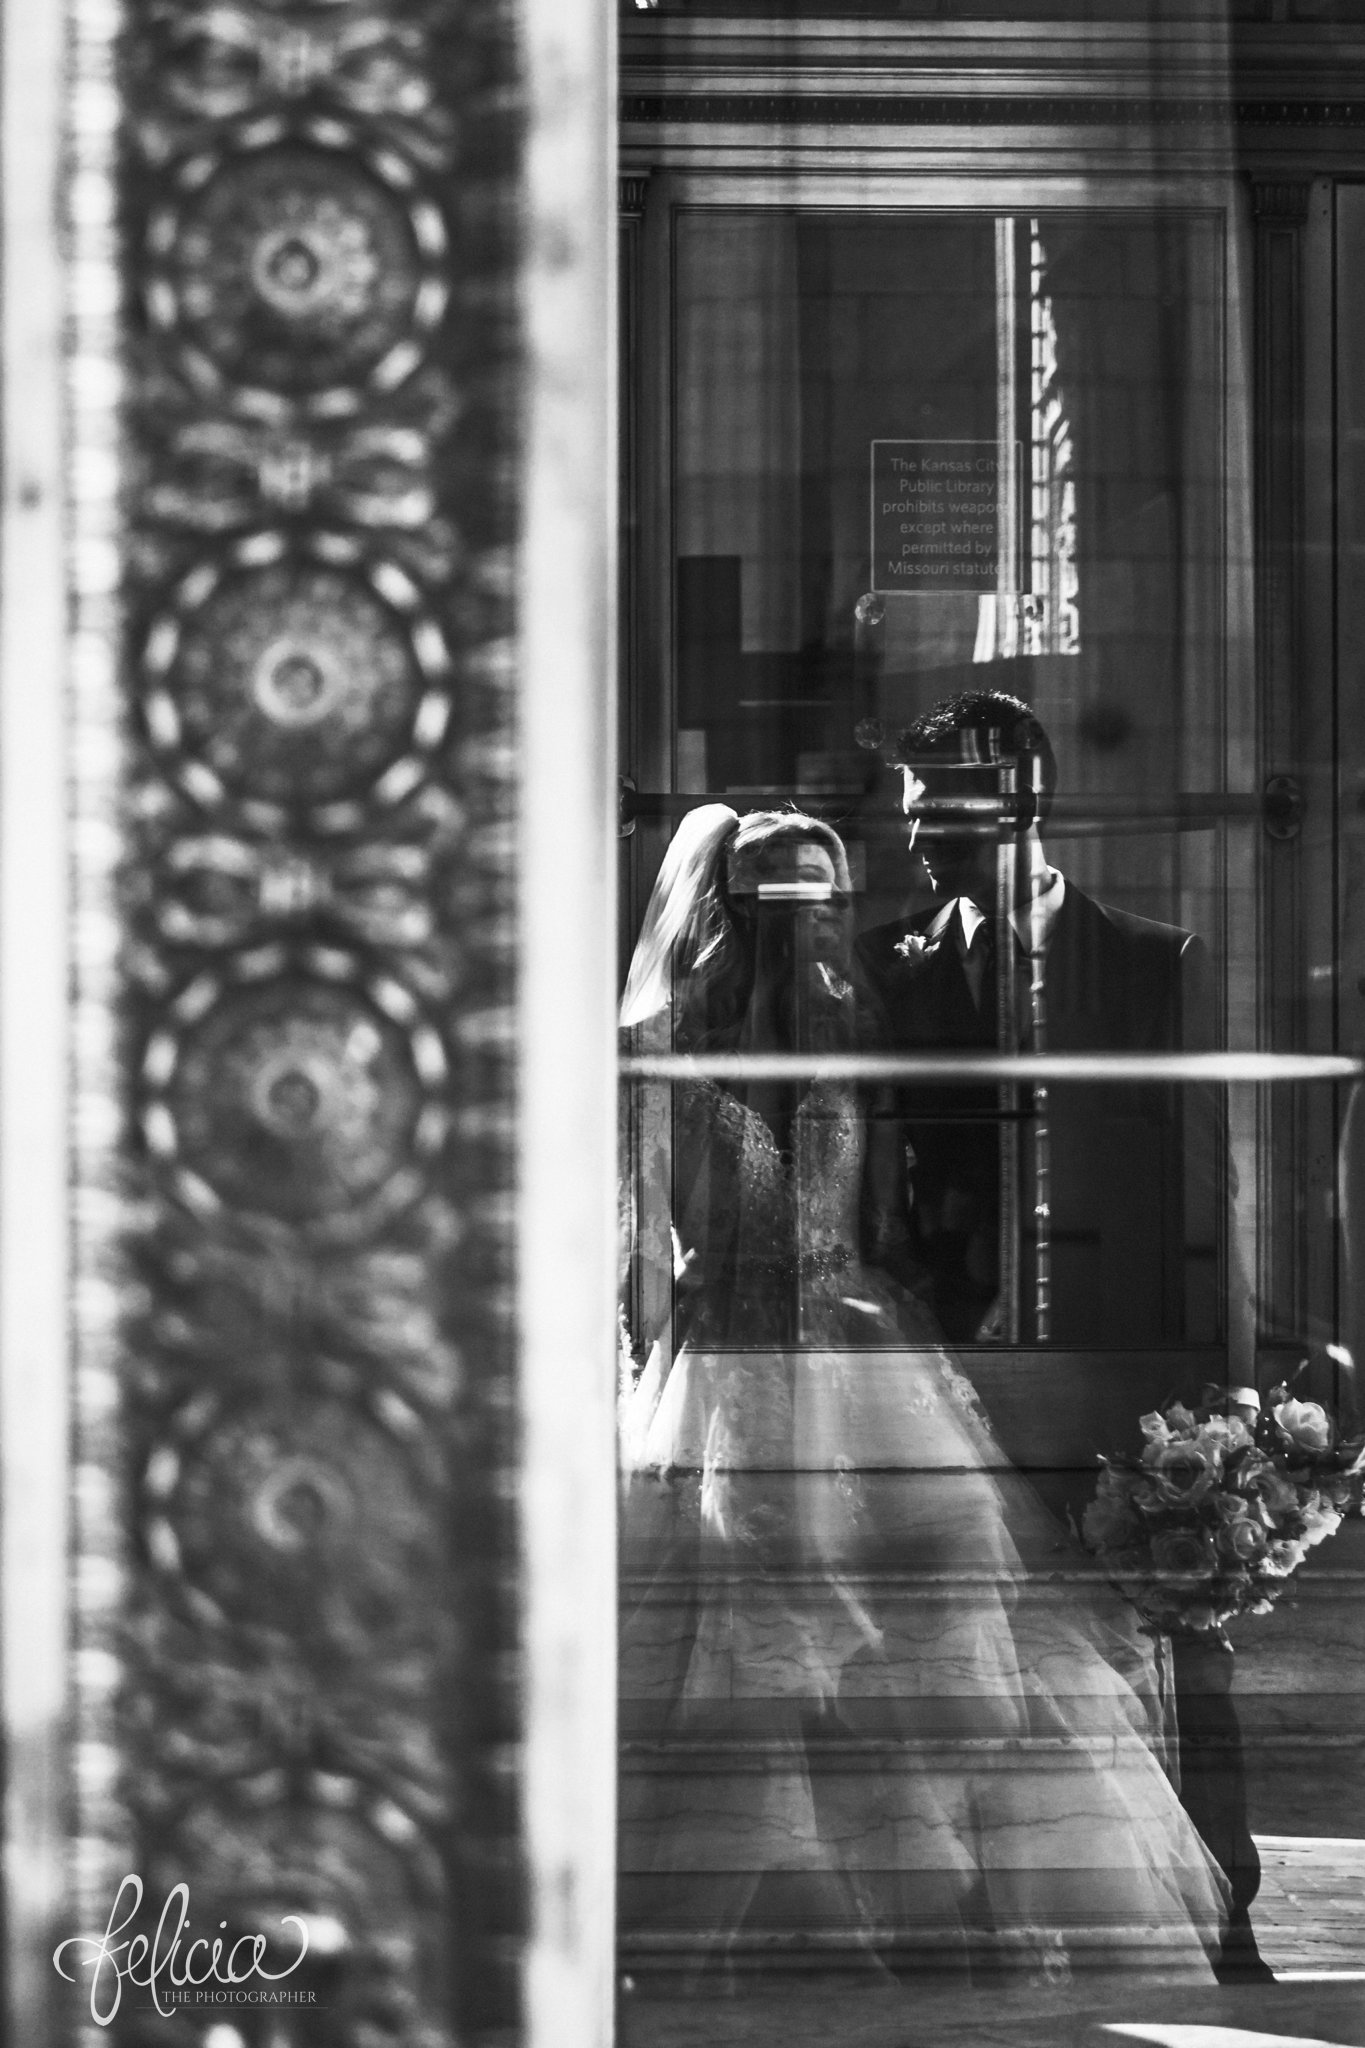 images by feliciathephotographer.com | wedding photographer | kansas city | redemptorist | classic | portrait | black and white | reflection | abstract | details | lace dress | bride and groom | romantic | modern | 